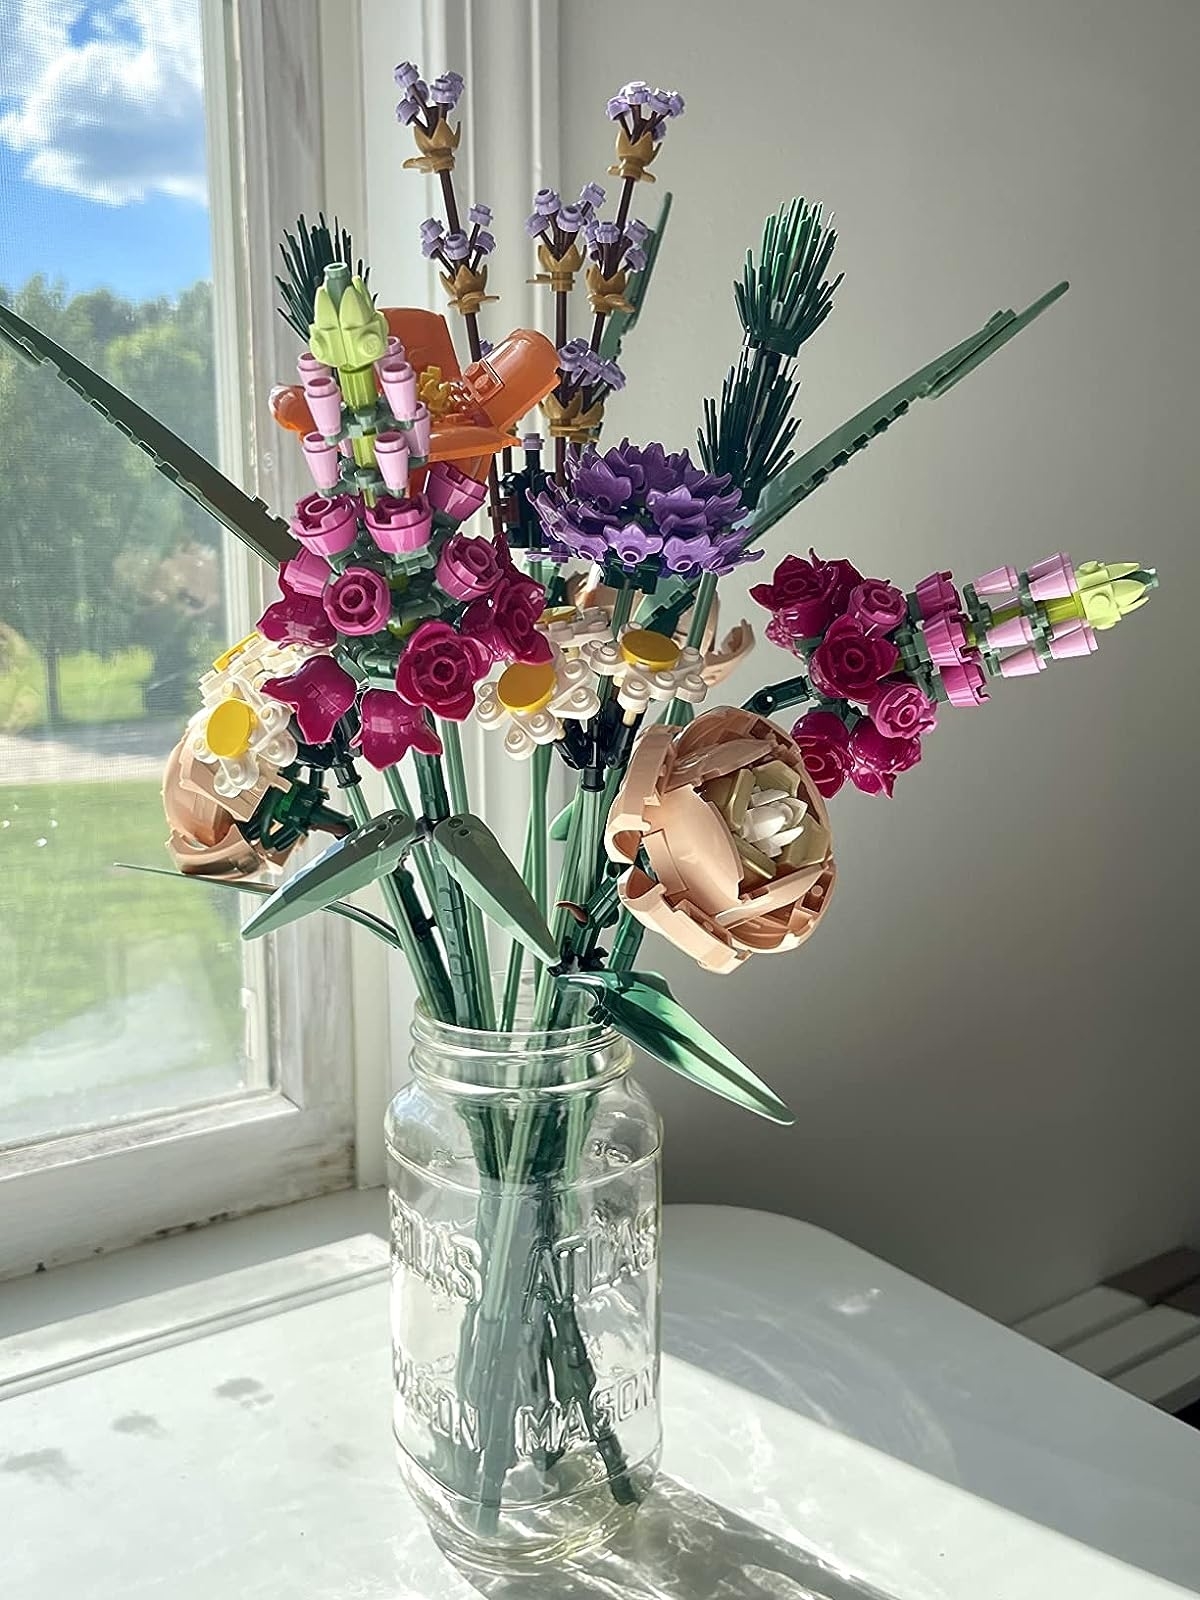 Reviewer&#x27;s photo of the Lego bouquet in a vase